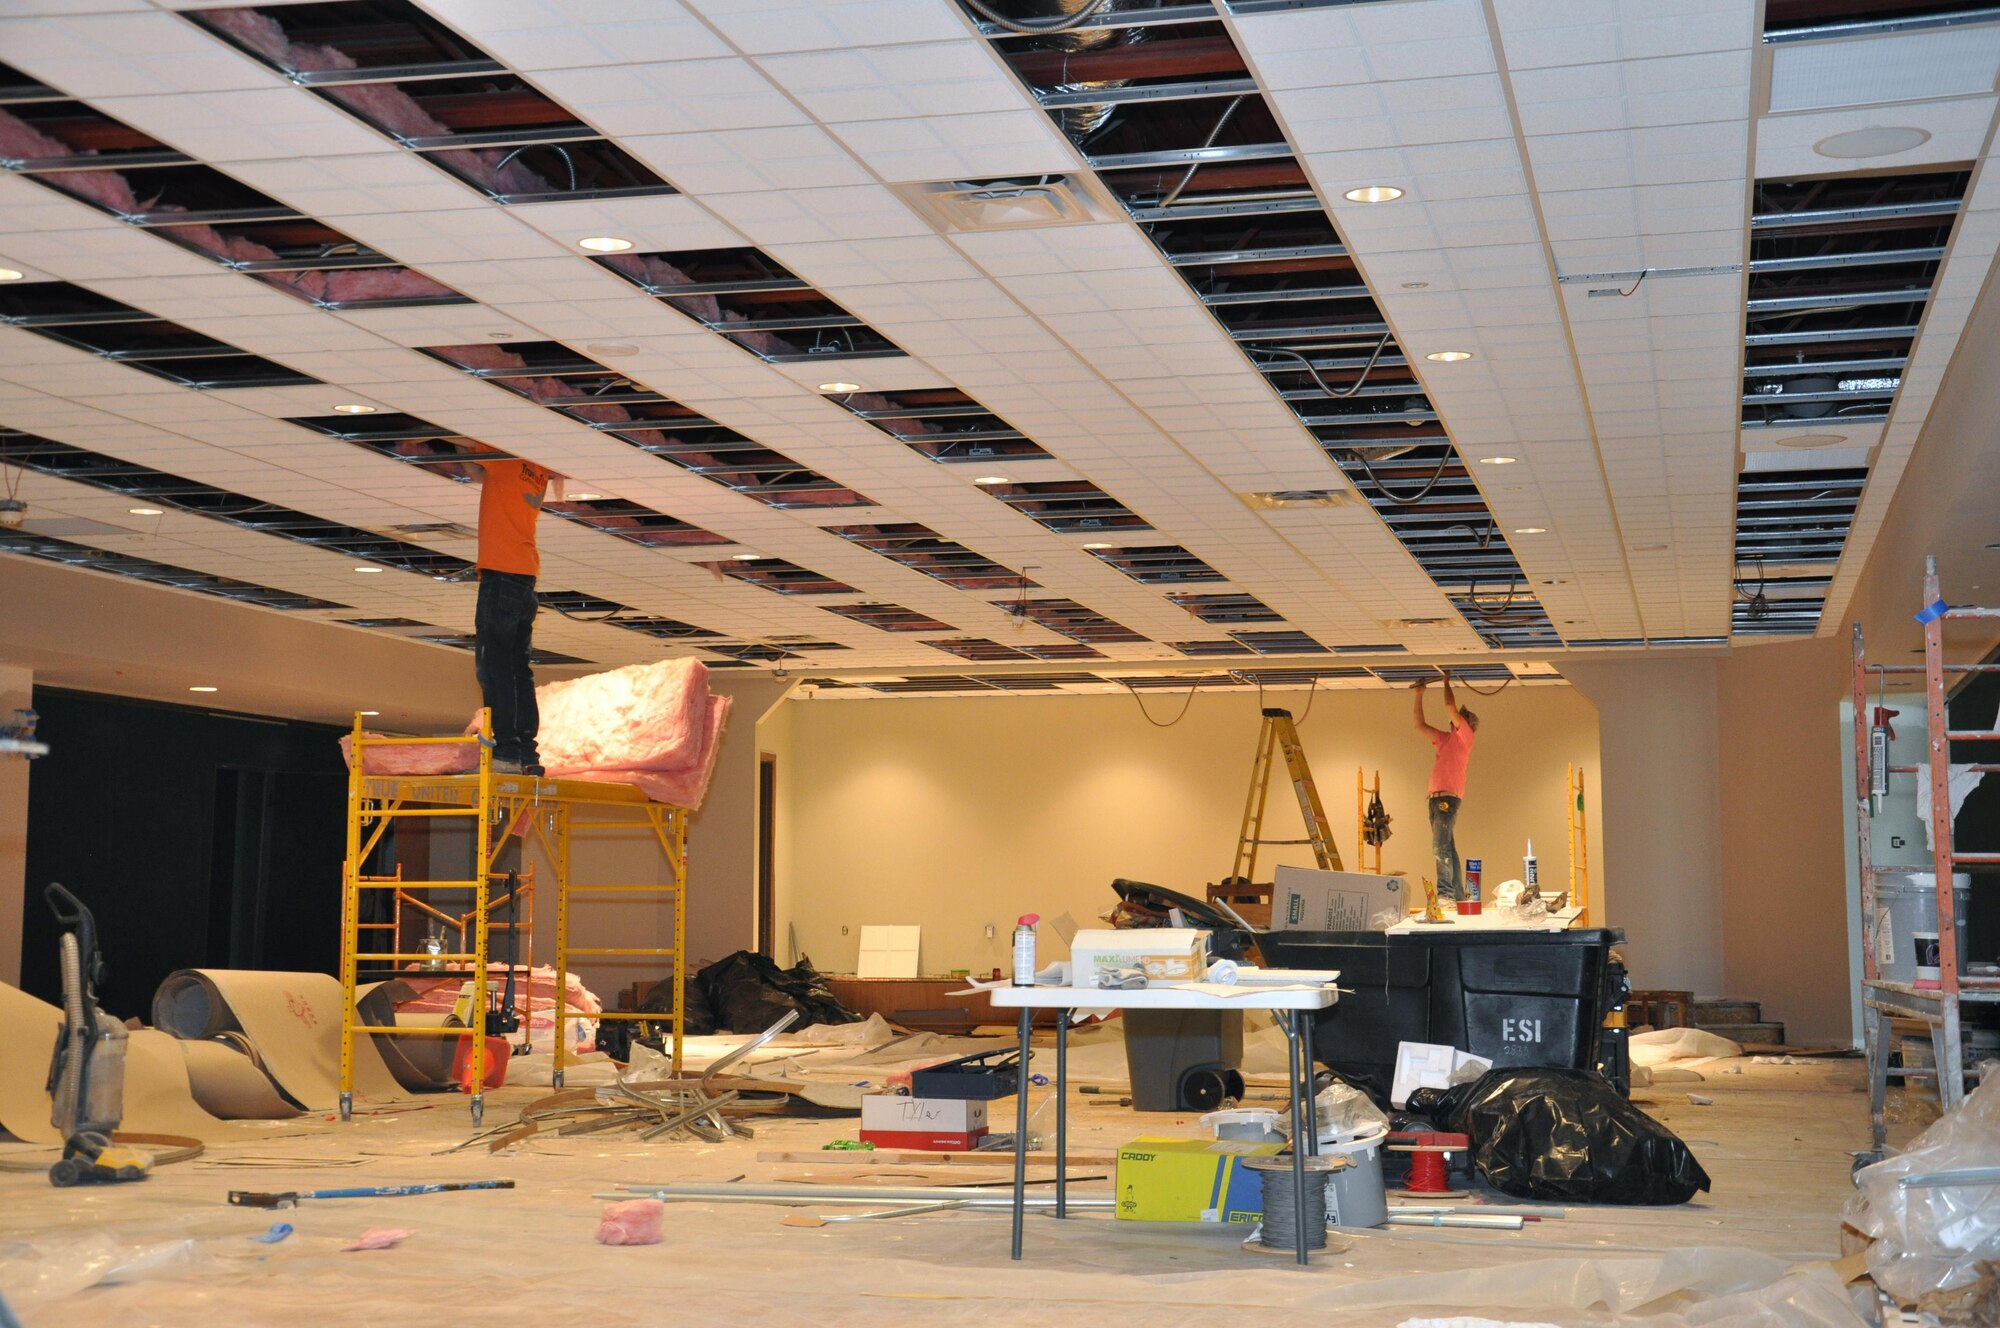 Construction workers lay insulation in the Wright-Patterson Club main ballroom on April 10, 2017. Improvements included leveling the ceiling, adding wings to the renovated stage, new flooring and upgraded lighting throughout that enables the ballroom, Daedallion Room and the Bicycle Lounge to have individual lighting controls for various events. The ballroom and adjacent rooms closed in December 2016 for the renovations, and are scheduled to reopen in late May. (U.S. Air Force photo/Jim Mitchell)